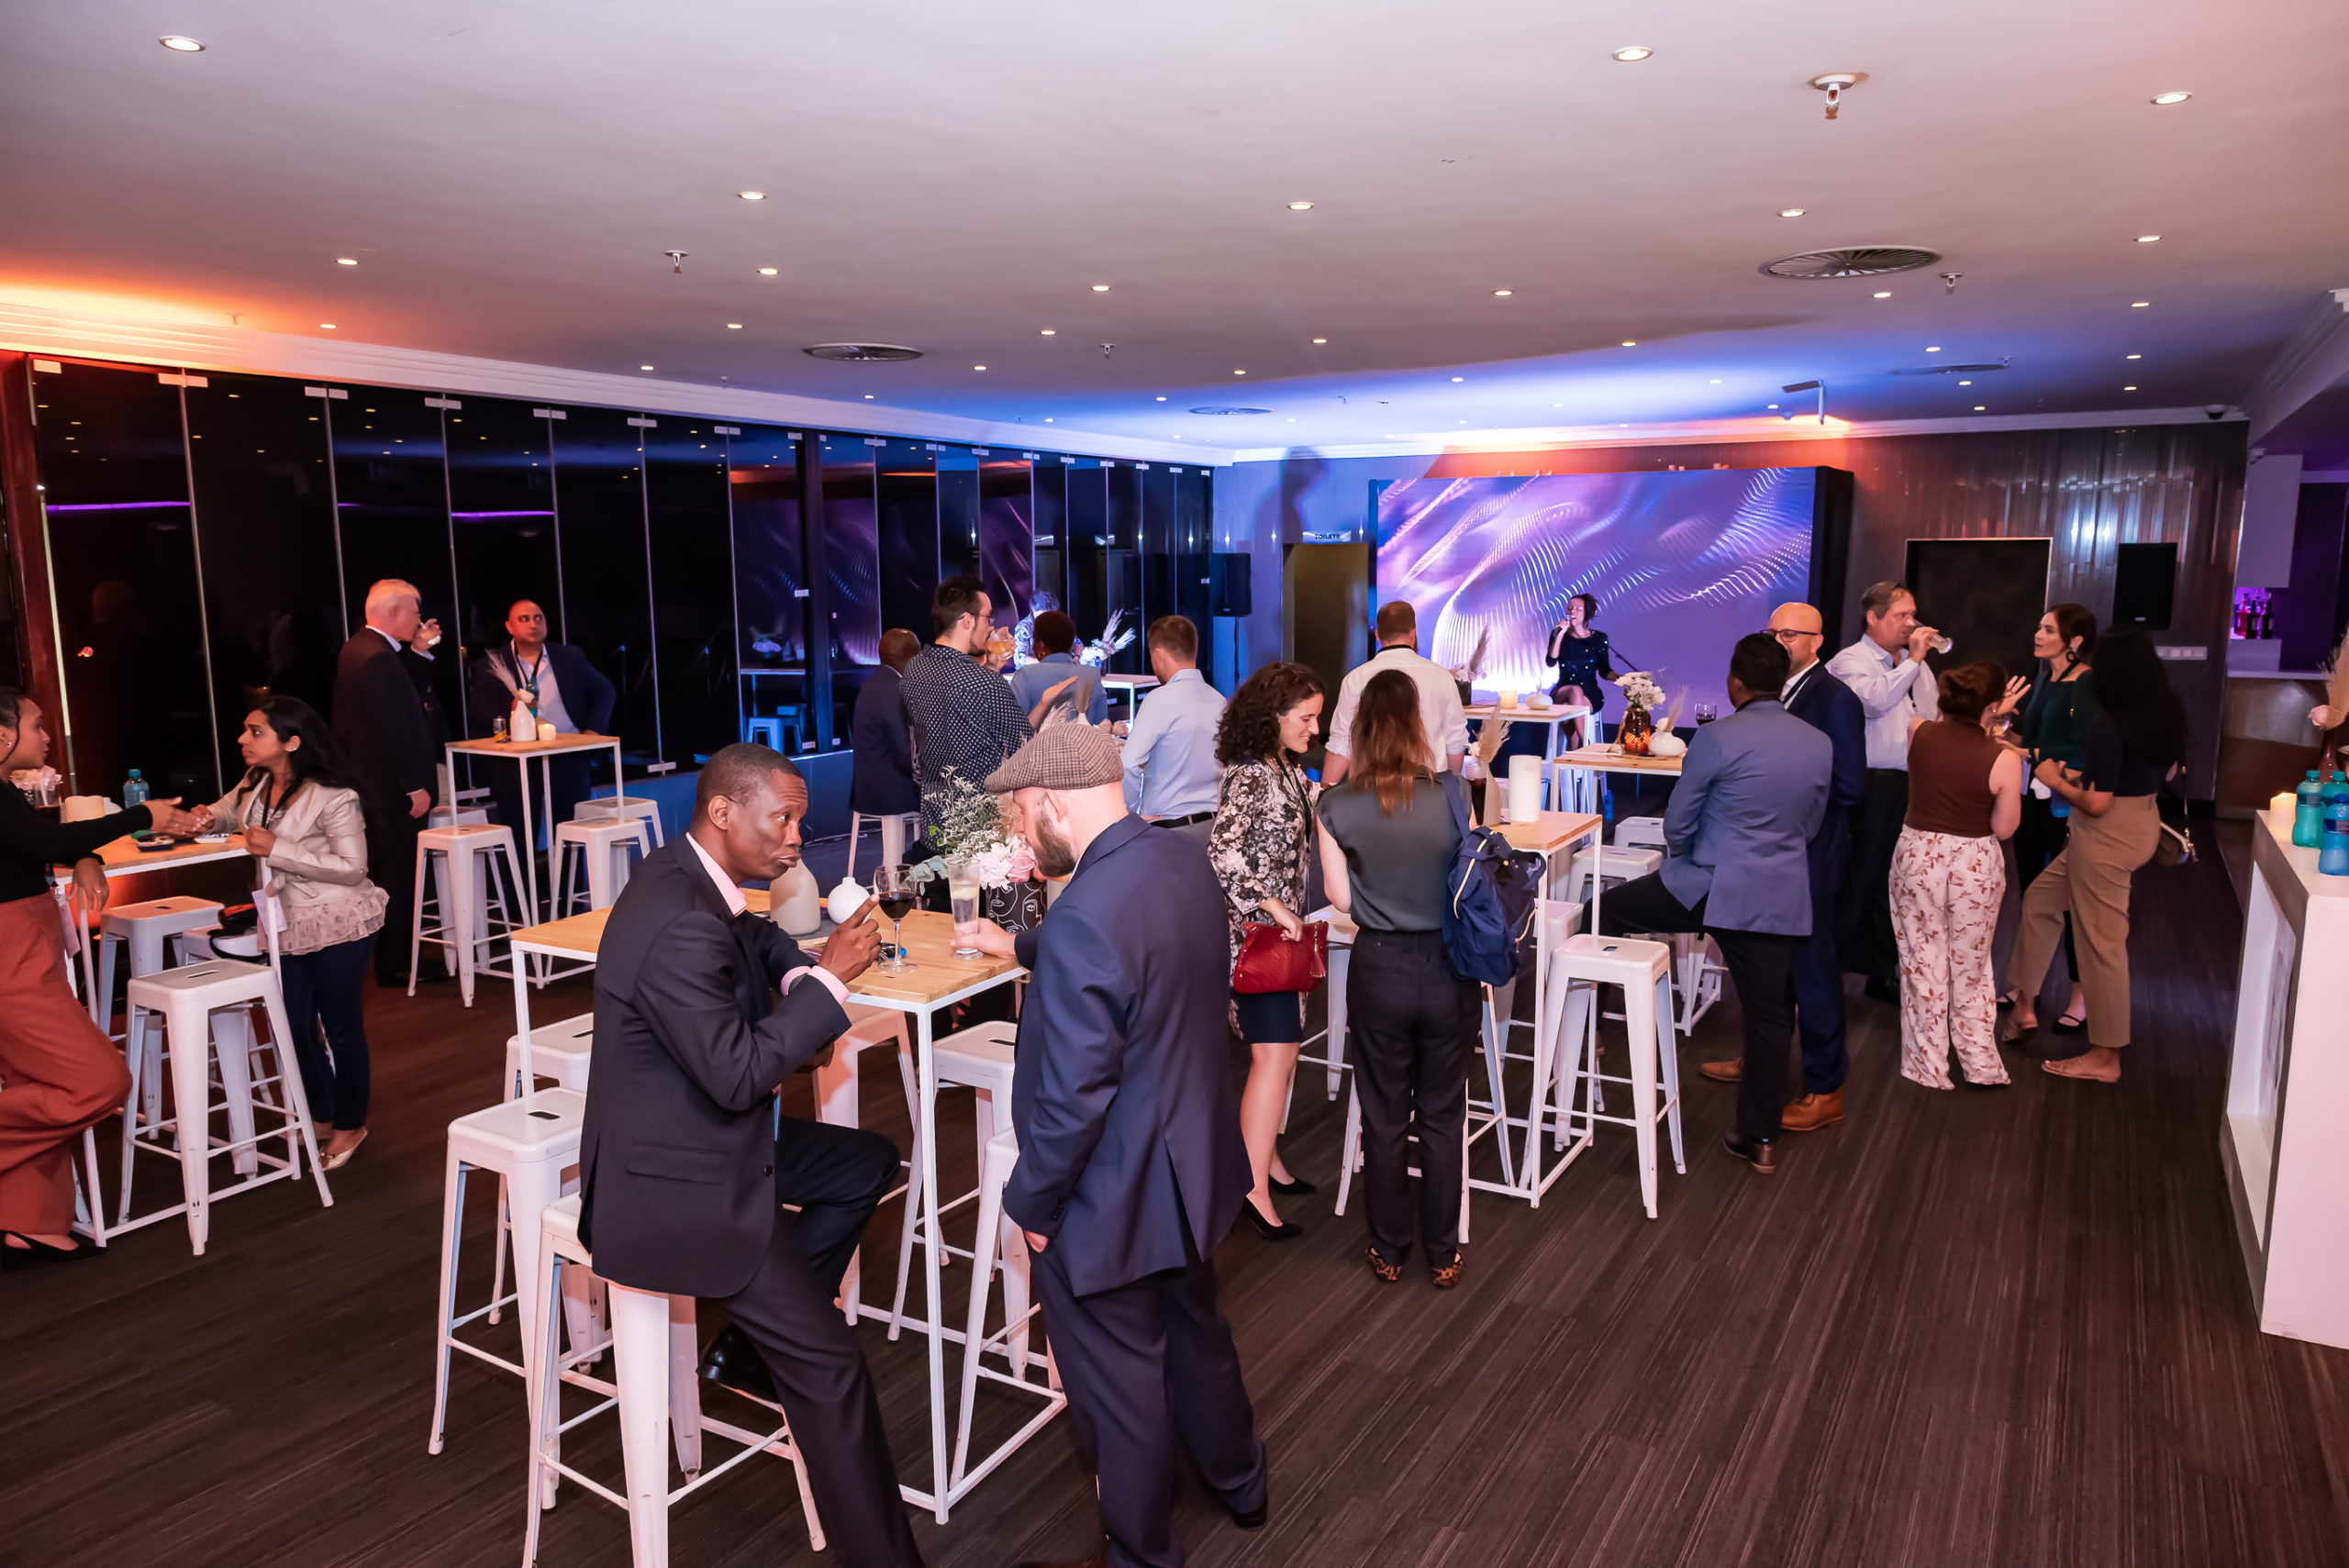 Building connections and celebrating achievements in South Africa with Global Alliance Africa